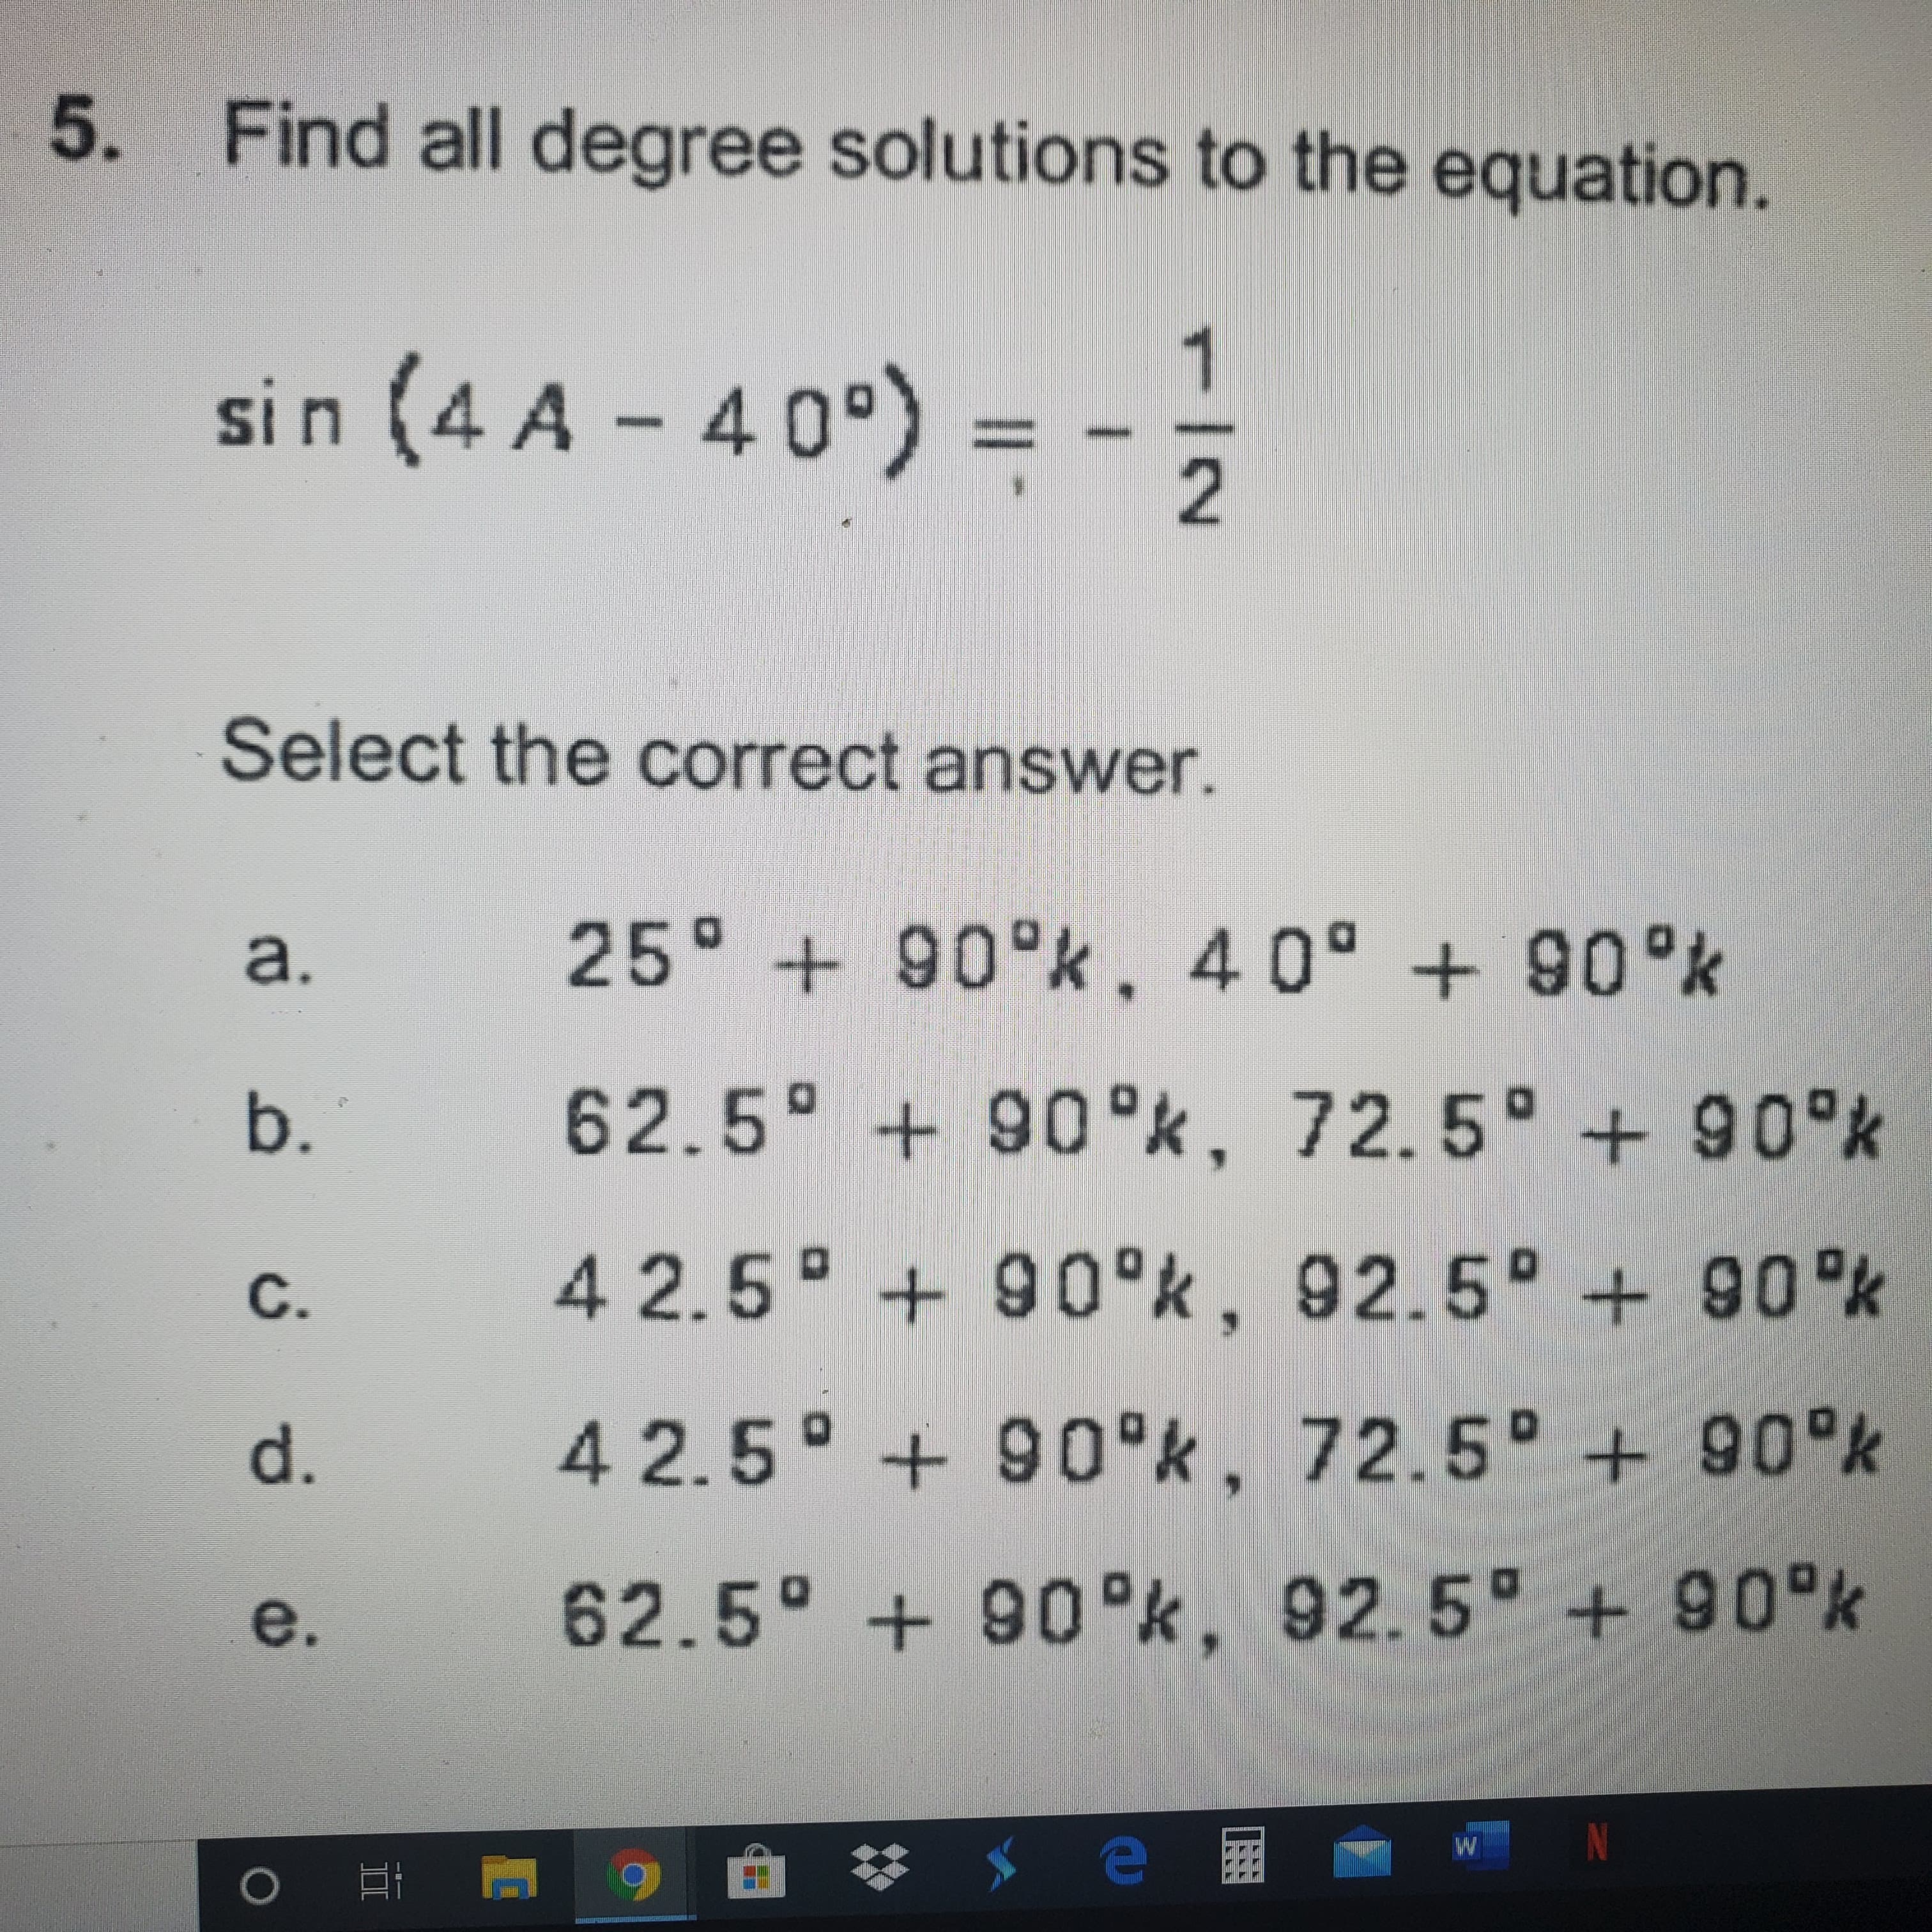 Find all degree solutions to the equation.
